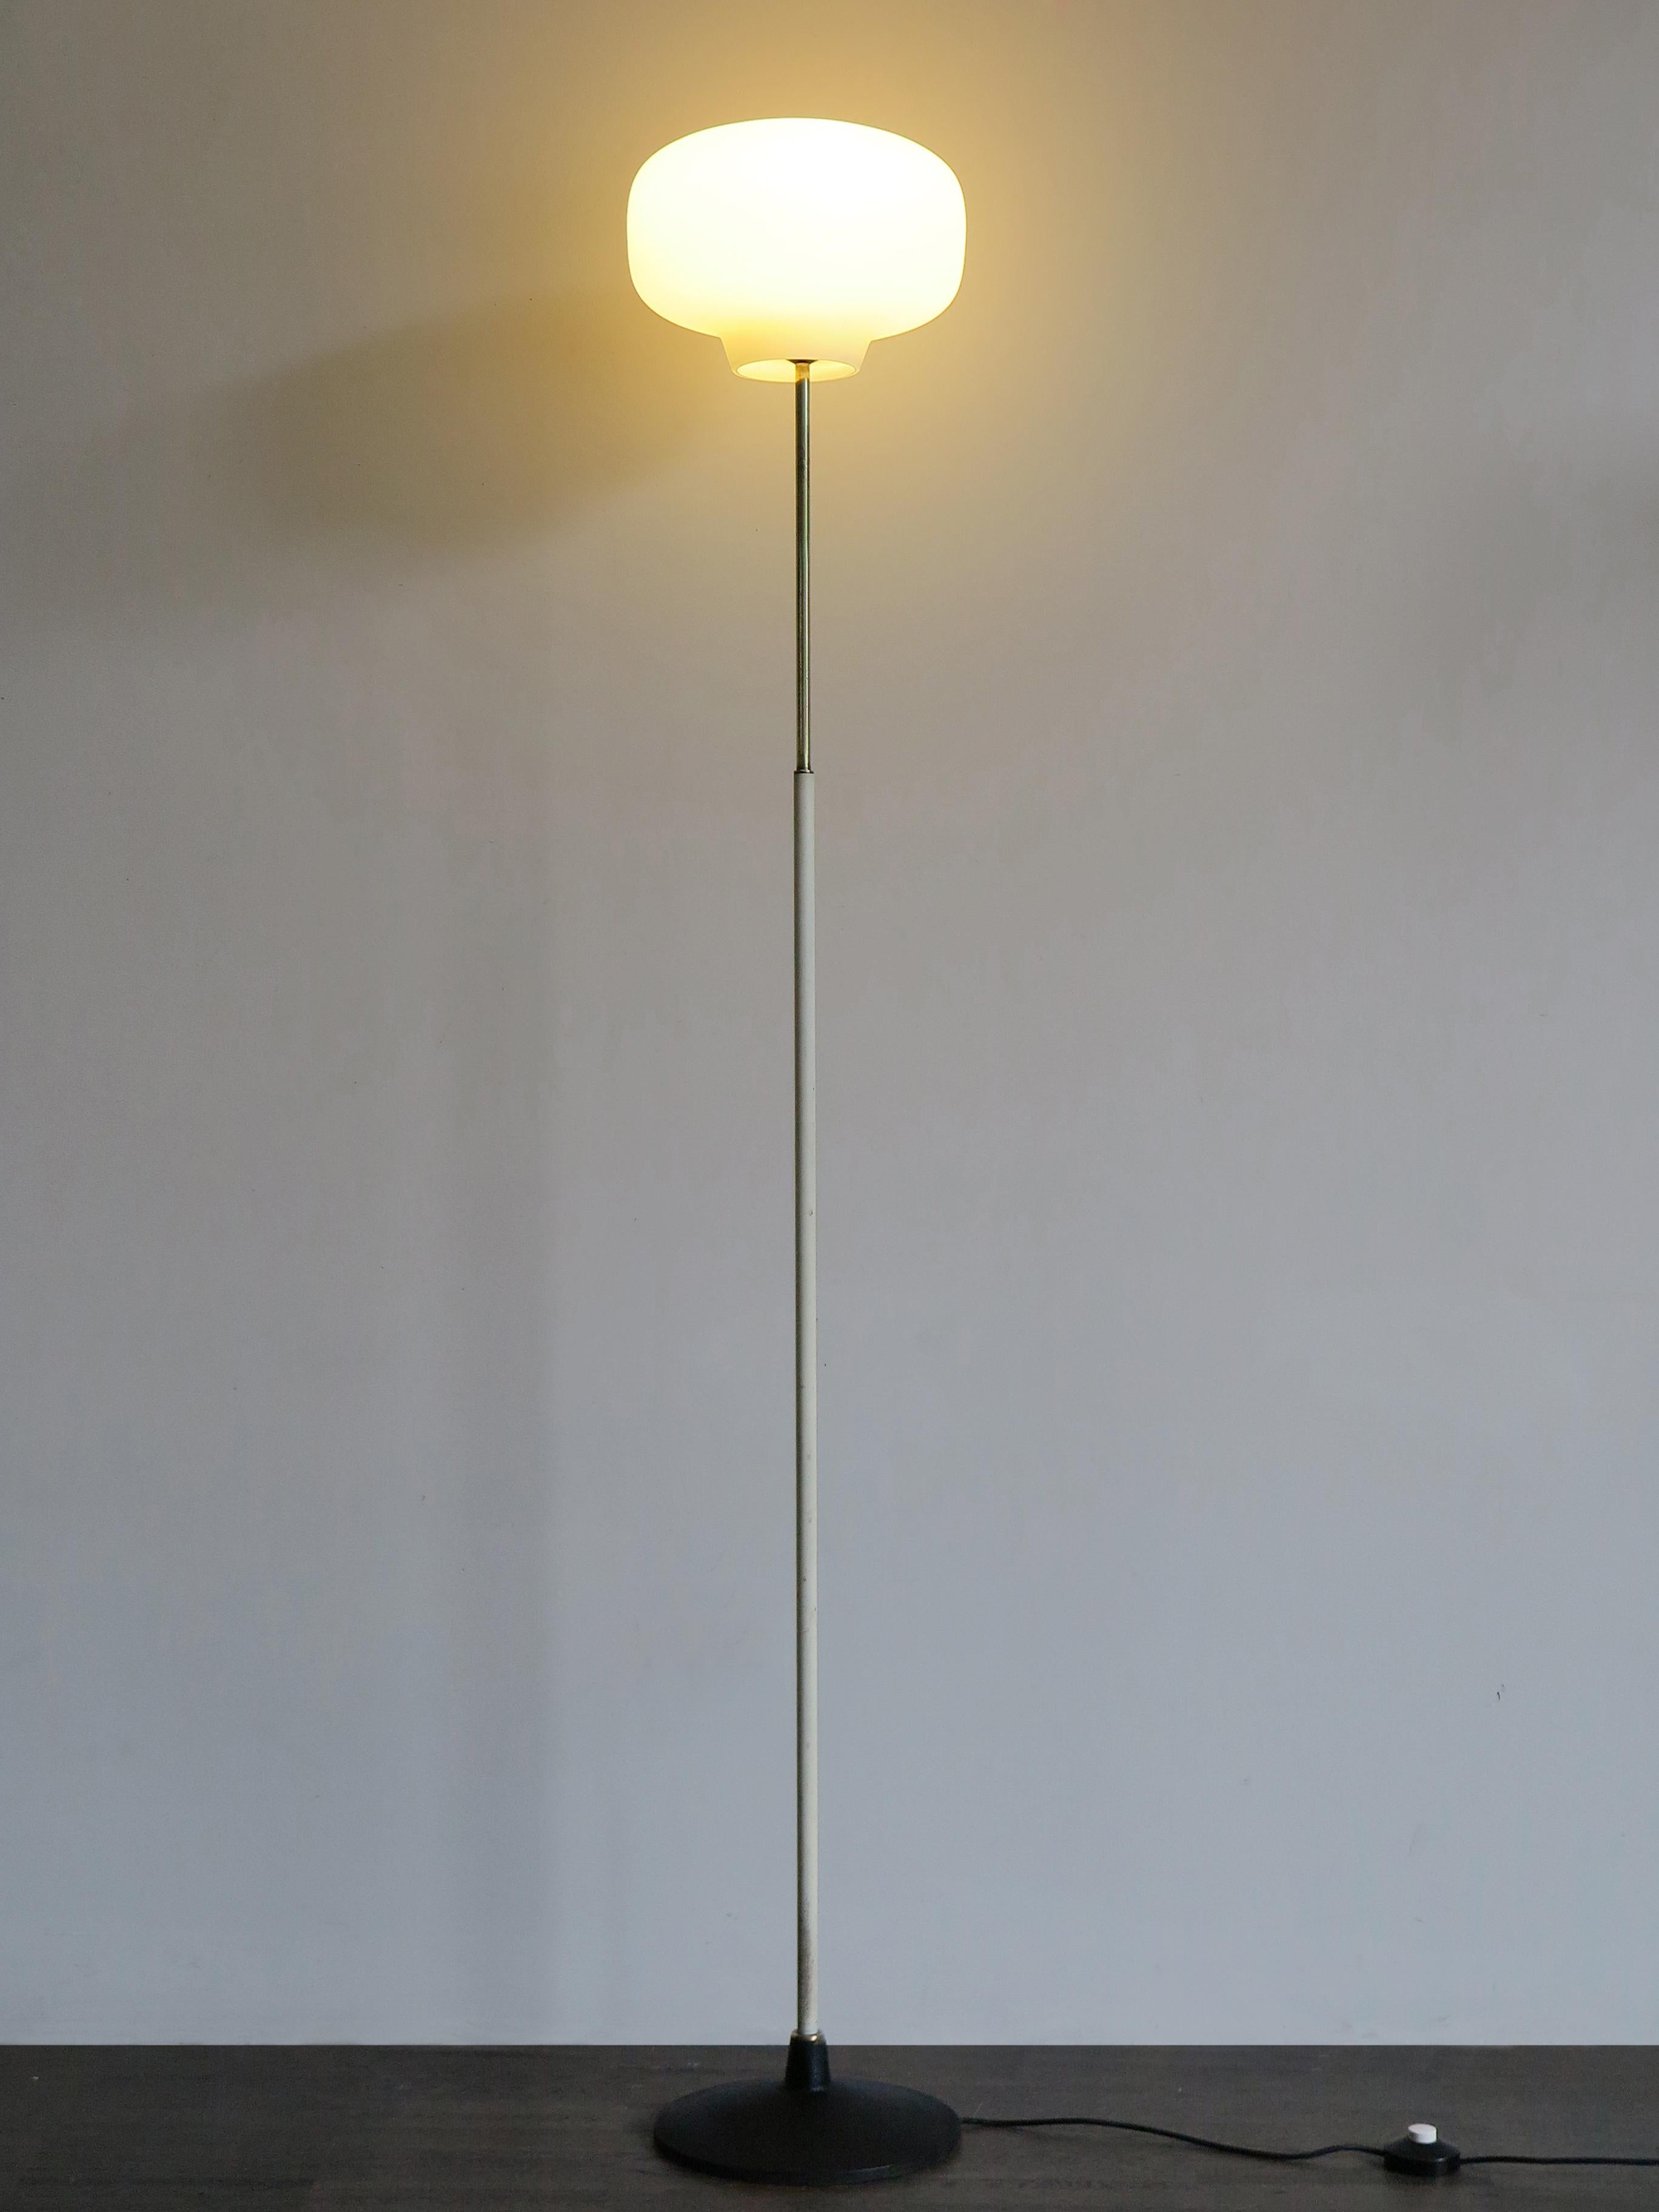 Italian Mid-Century Modern design floor lamp produced by Stilnovo,
diffuser in satin opal glass, tubular stem in painted steel and brass, cast iron base, circa 1950s.
Original label of the Stilnovo manufacture.

Please note that the lamp is